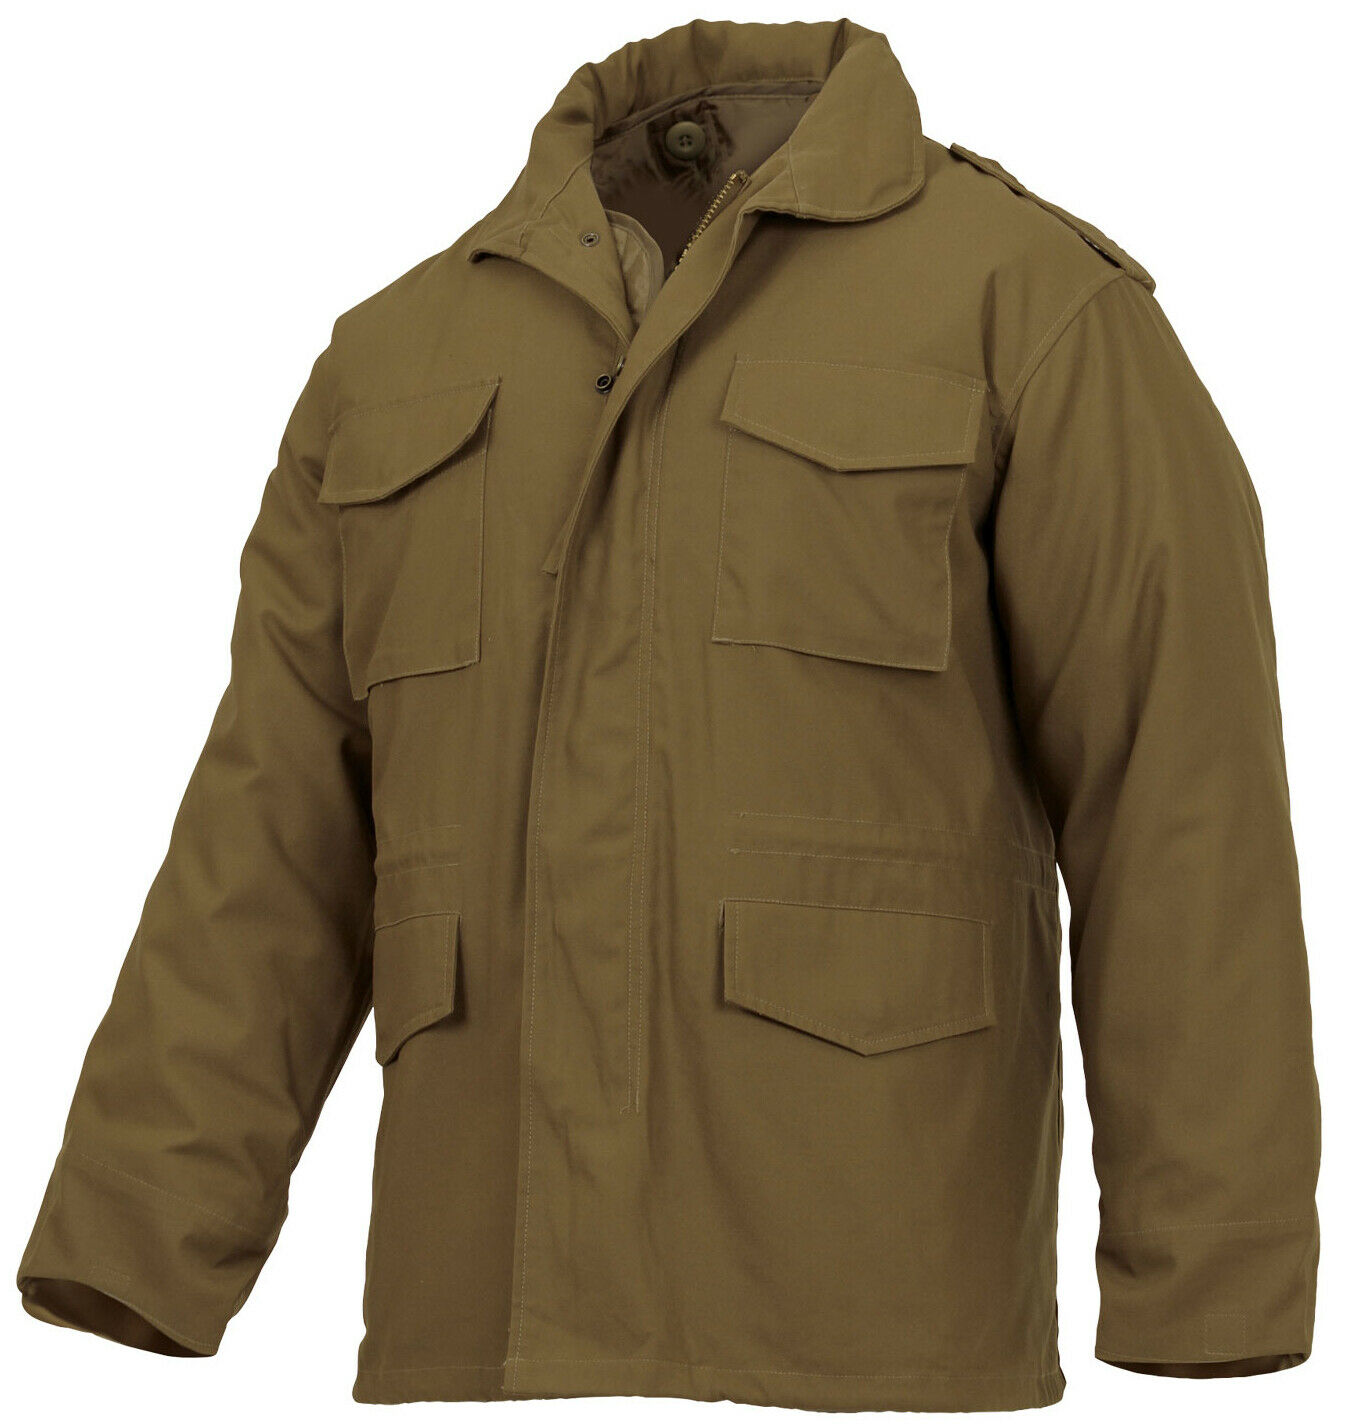 Rothco M-65 Field Jacket With Liner - Coyote Brown